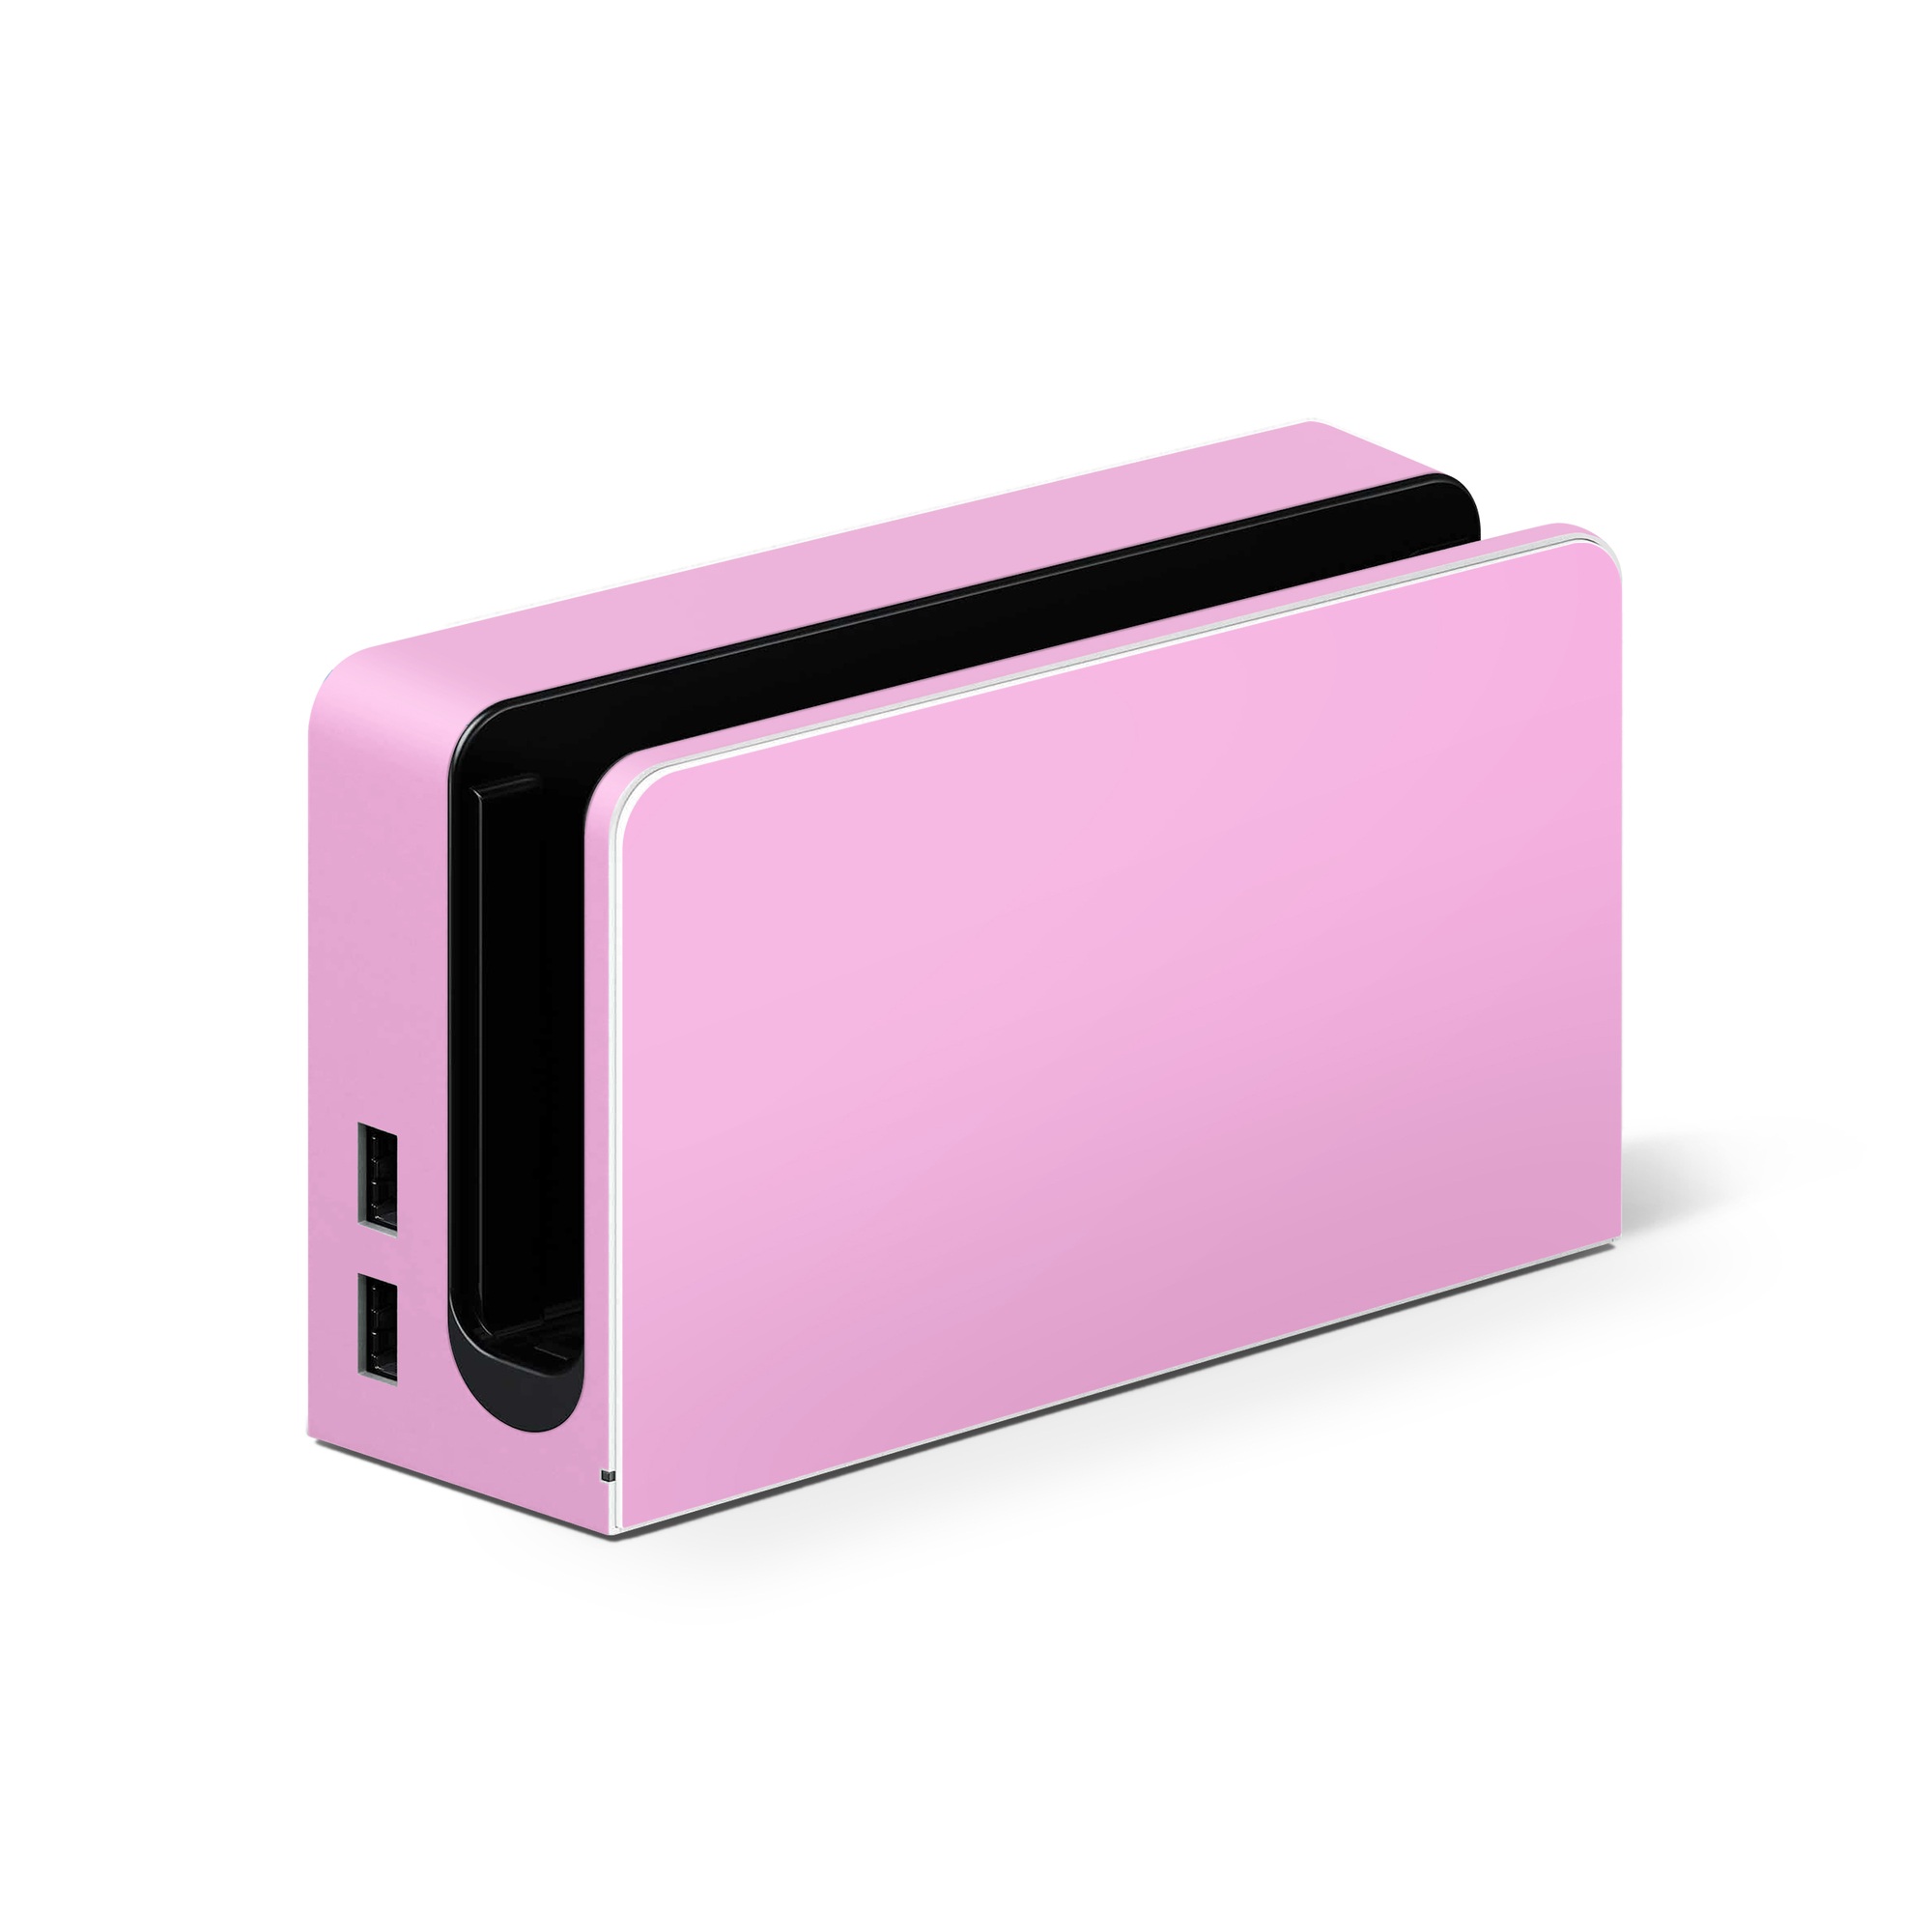 Nintendo Switch Skin - Solid State Pink (Image 2)